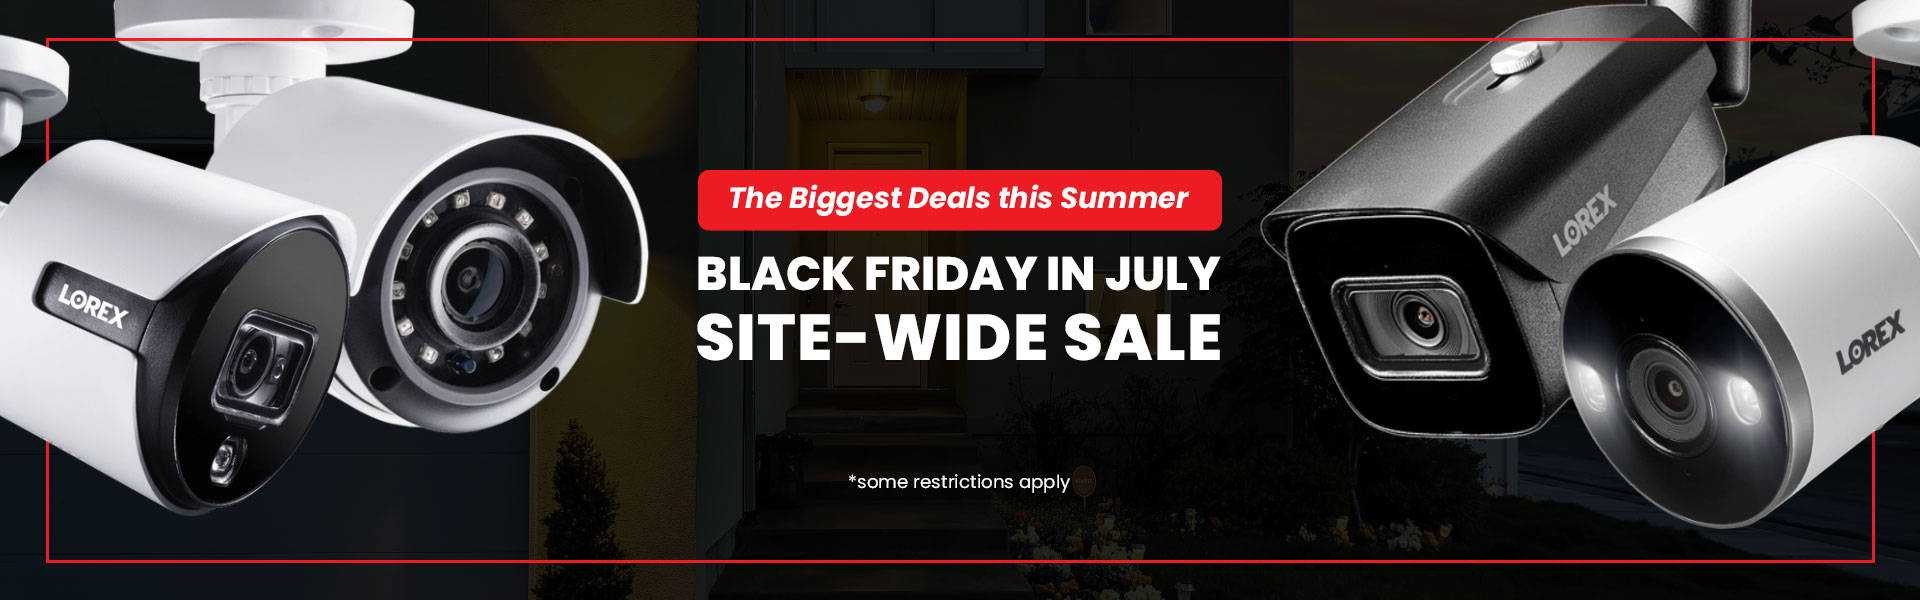 The Biggest Deals this Summer! Black Friday in July Site-Wide Sale